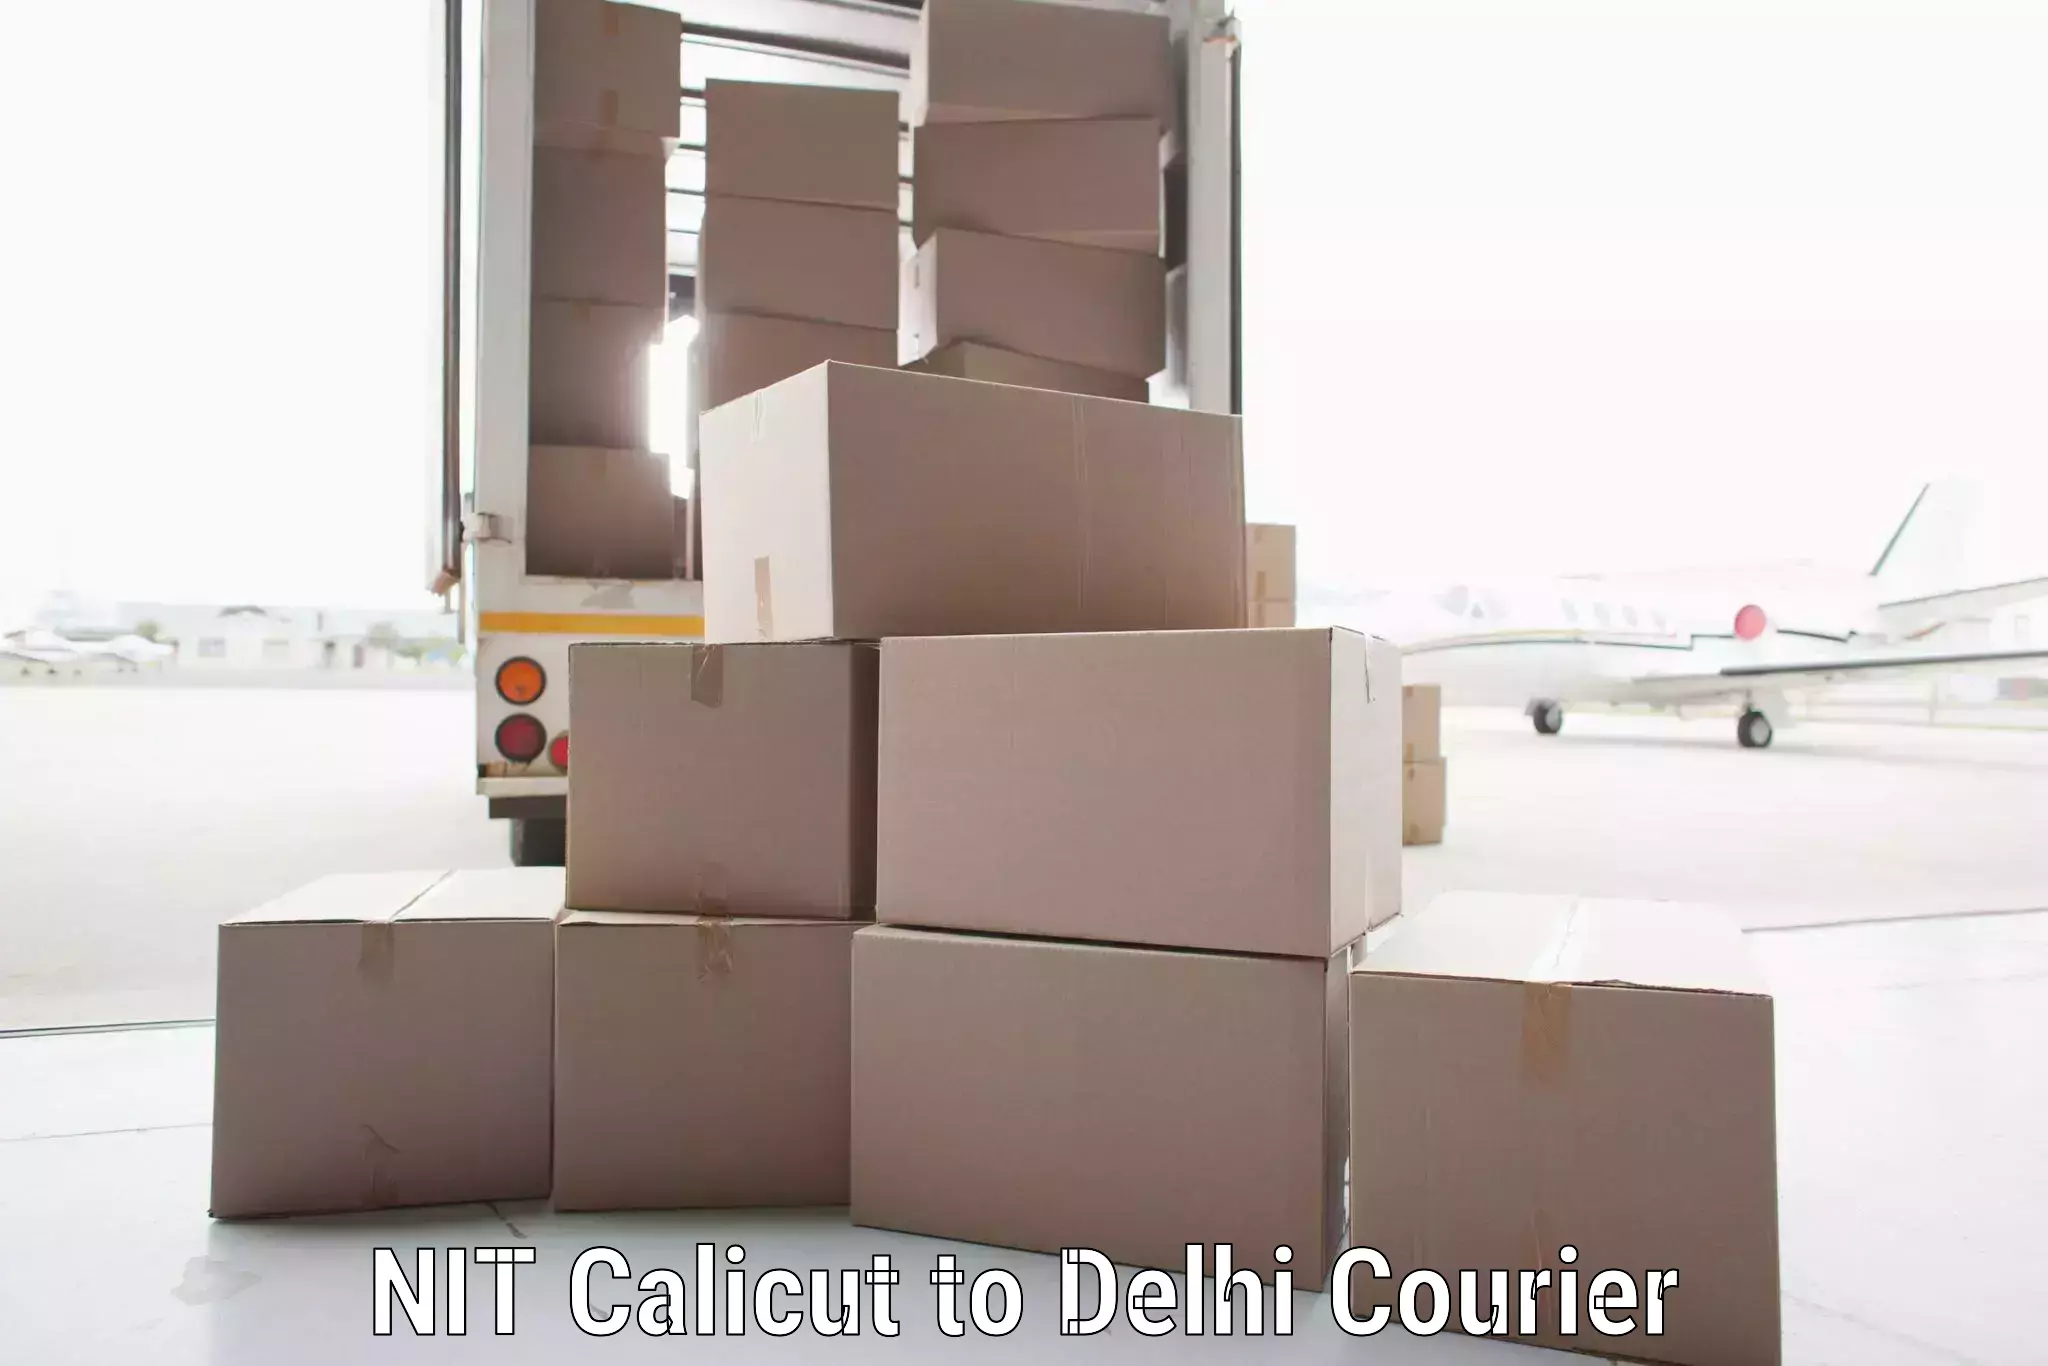 Cash on delivery service NIT Calicut to University of Delhi